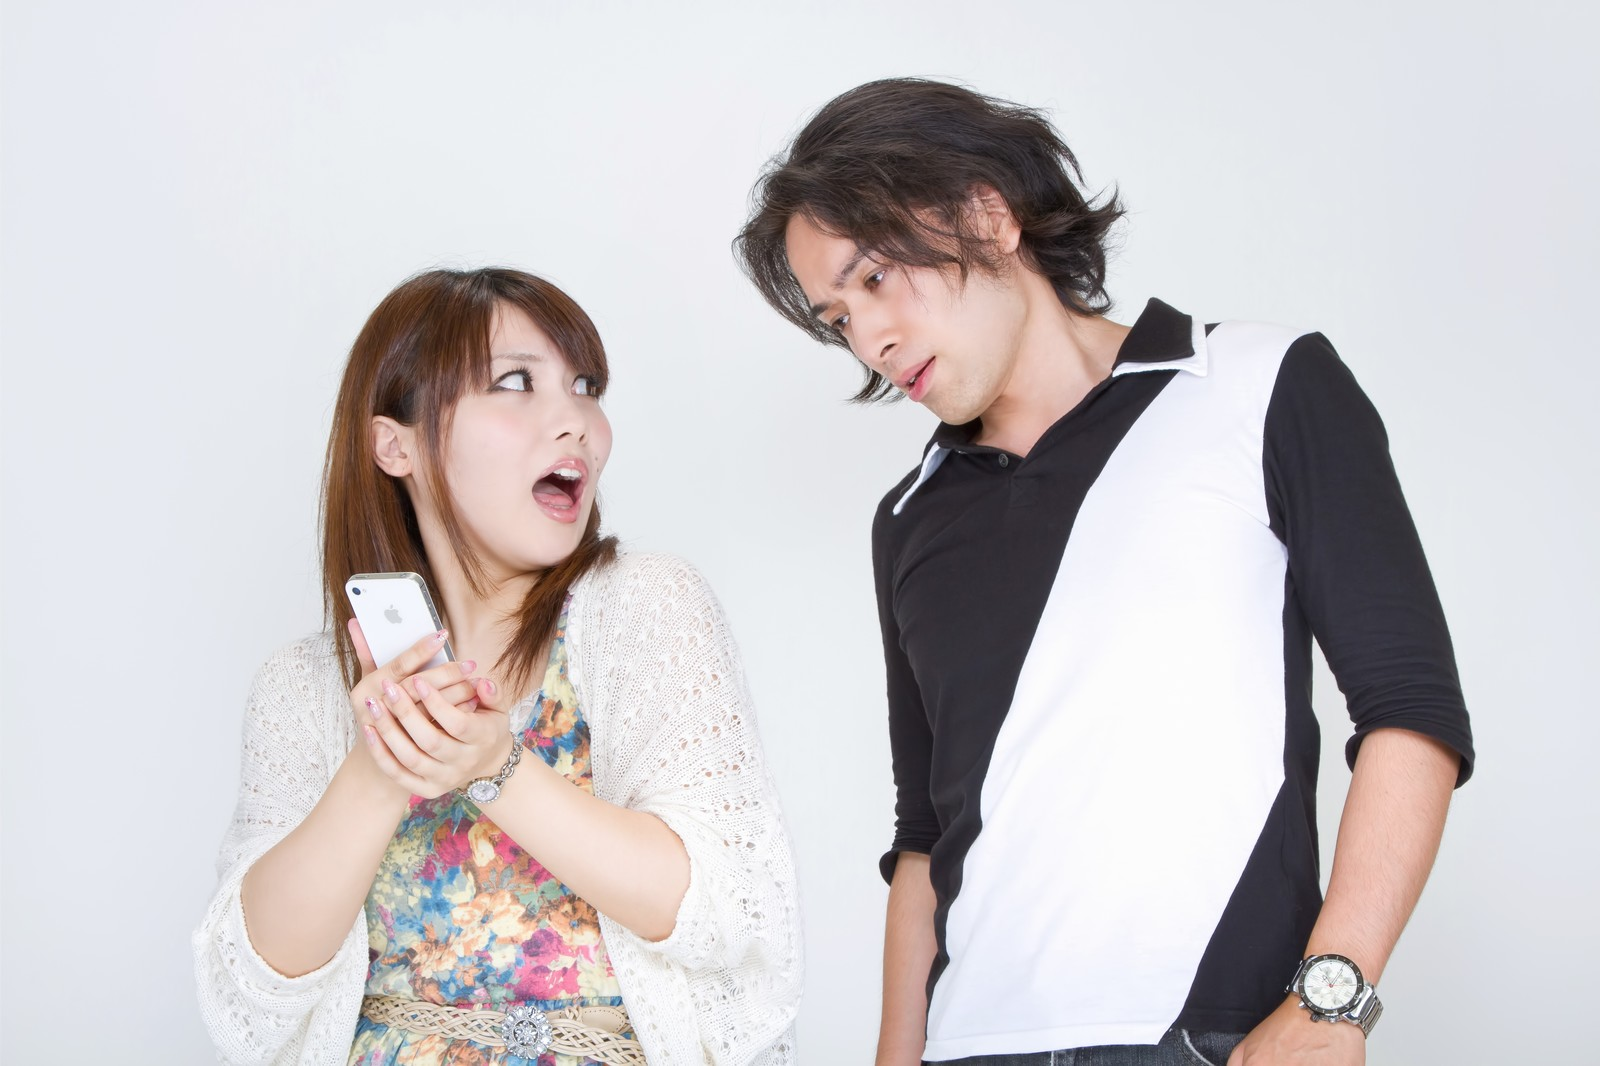 31 Percent Of Japanese Women Admit To Cheating On Lover Six Percent Say They Got Caught【survey